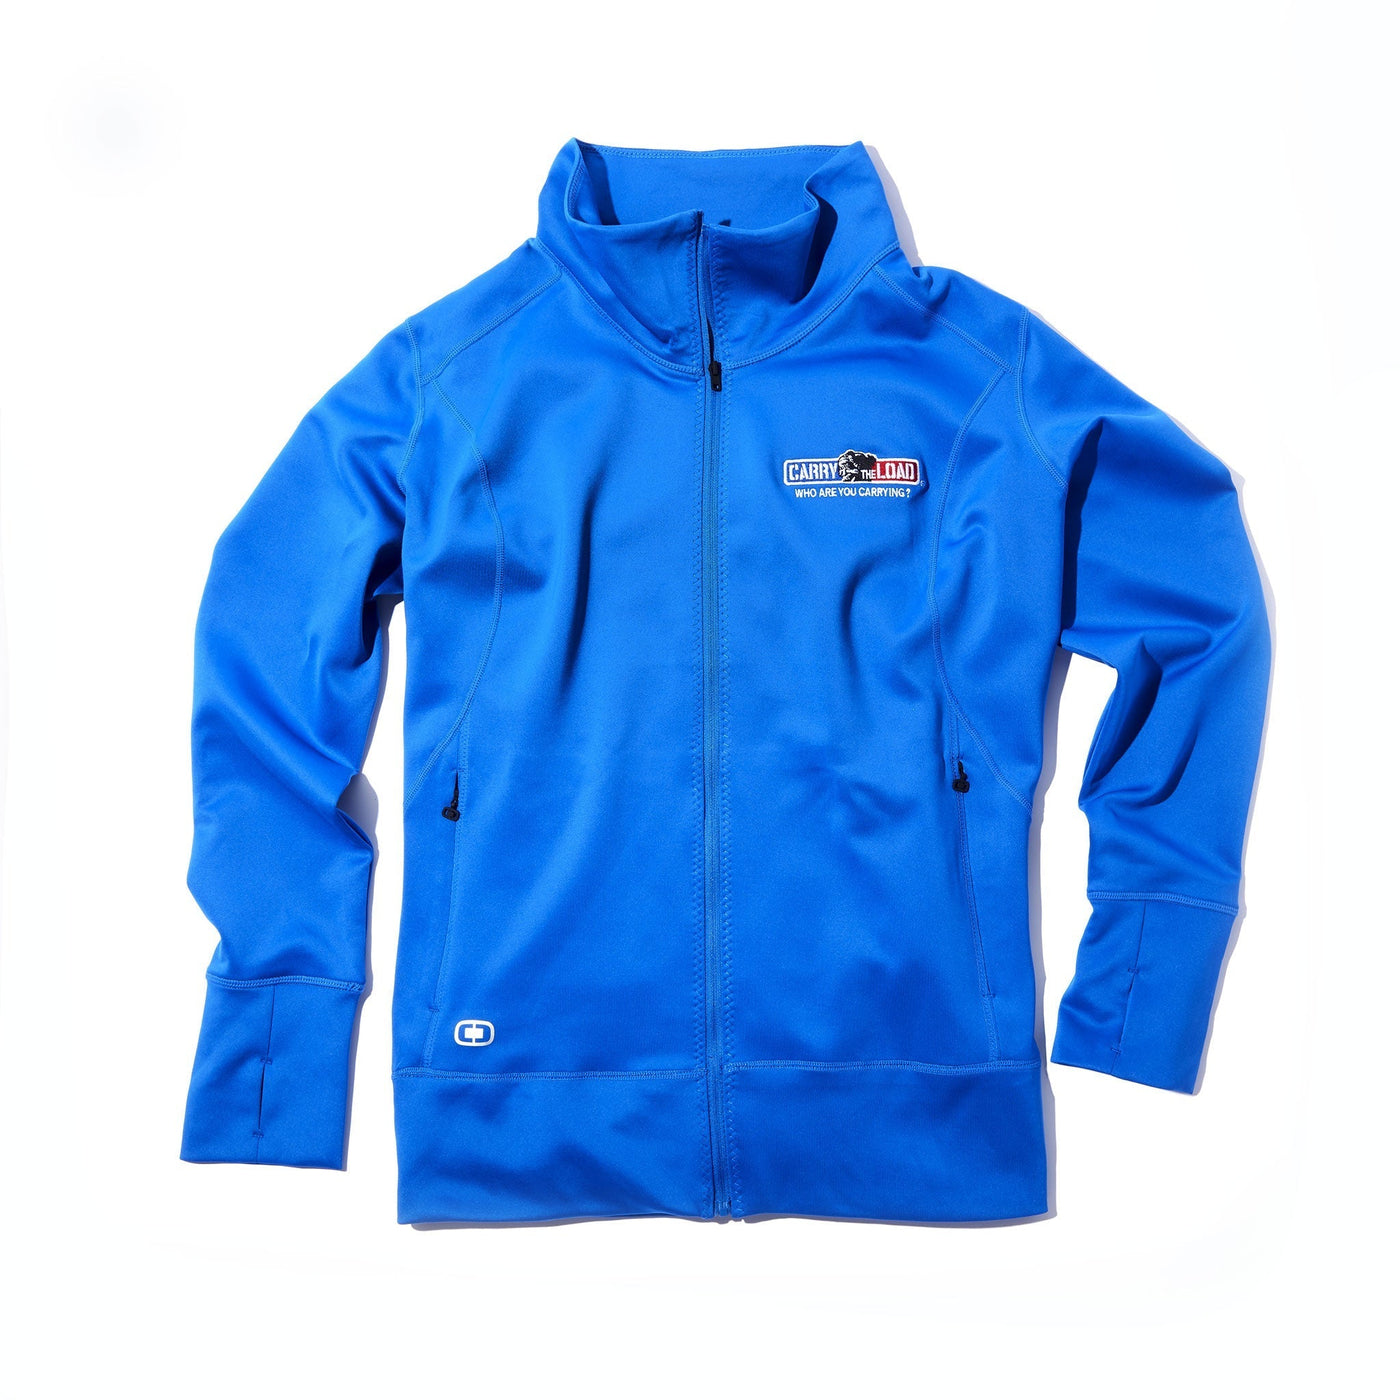 Women's Layered Reflective Jacket - Blue - Carry The Load Shop